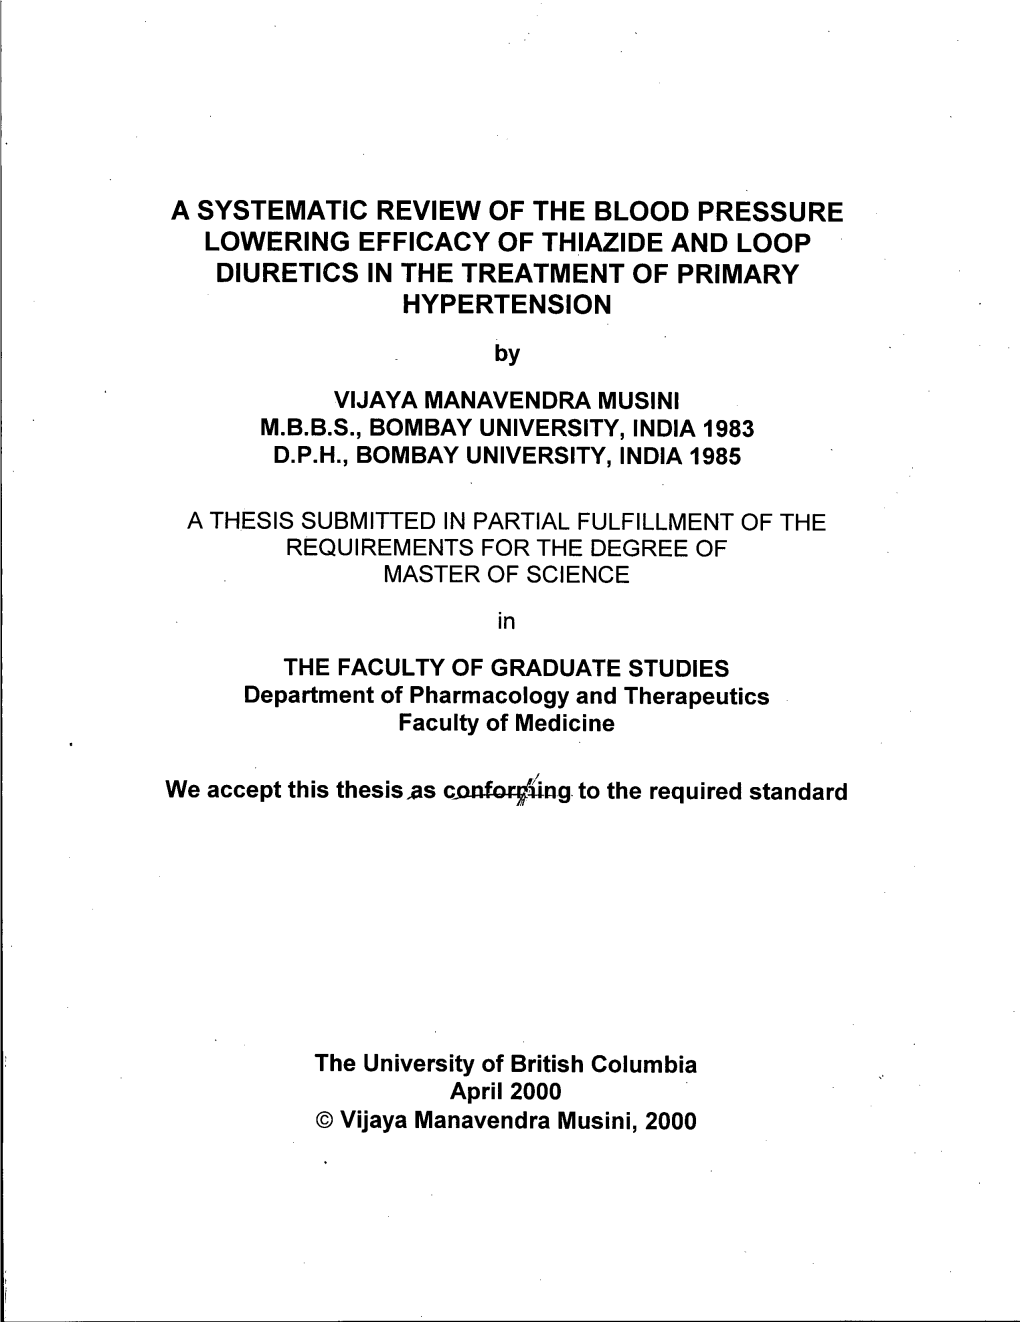 A Systematic Review of the Blood Pressure Lowering